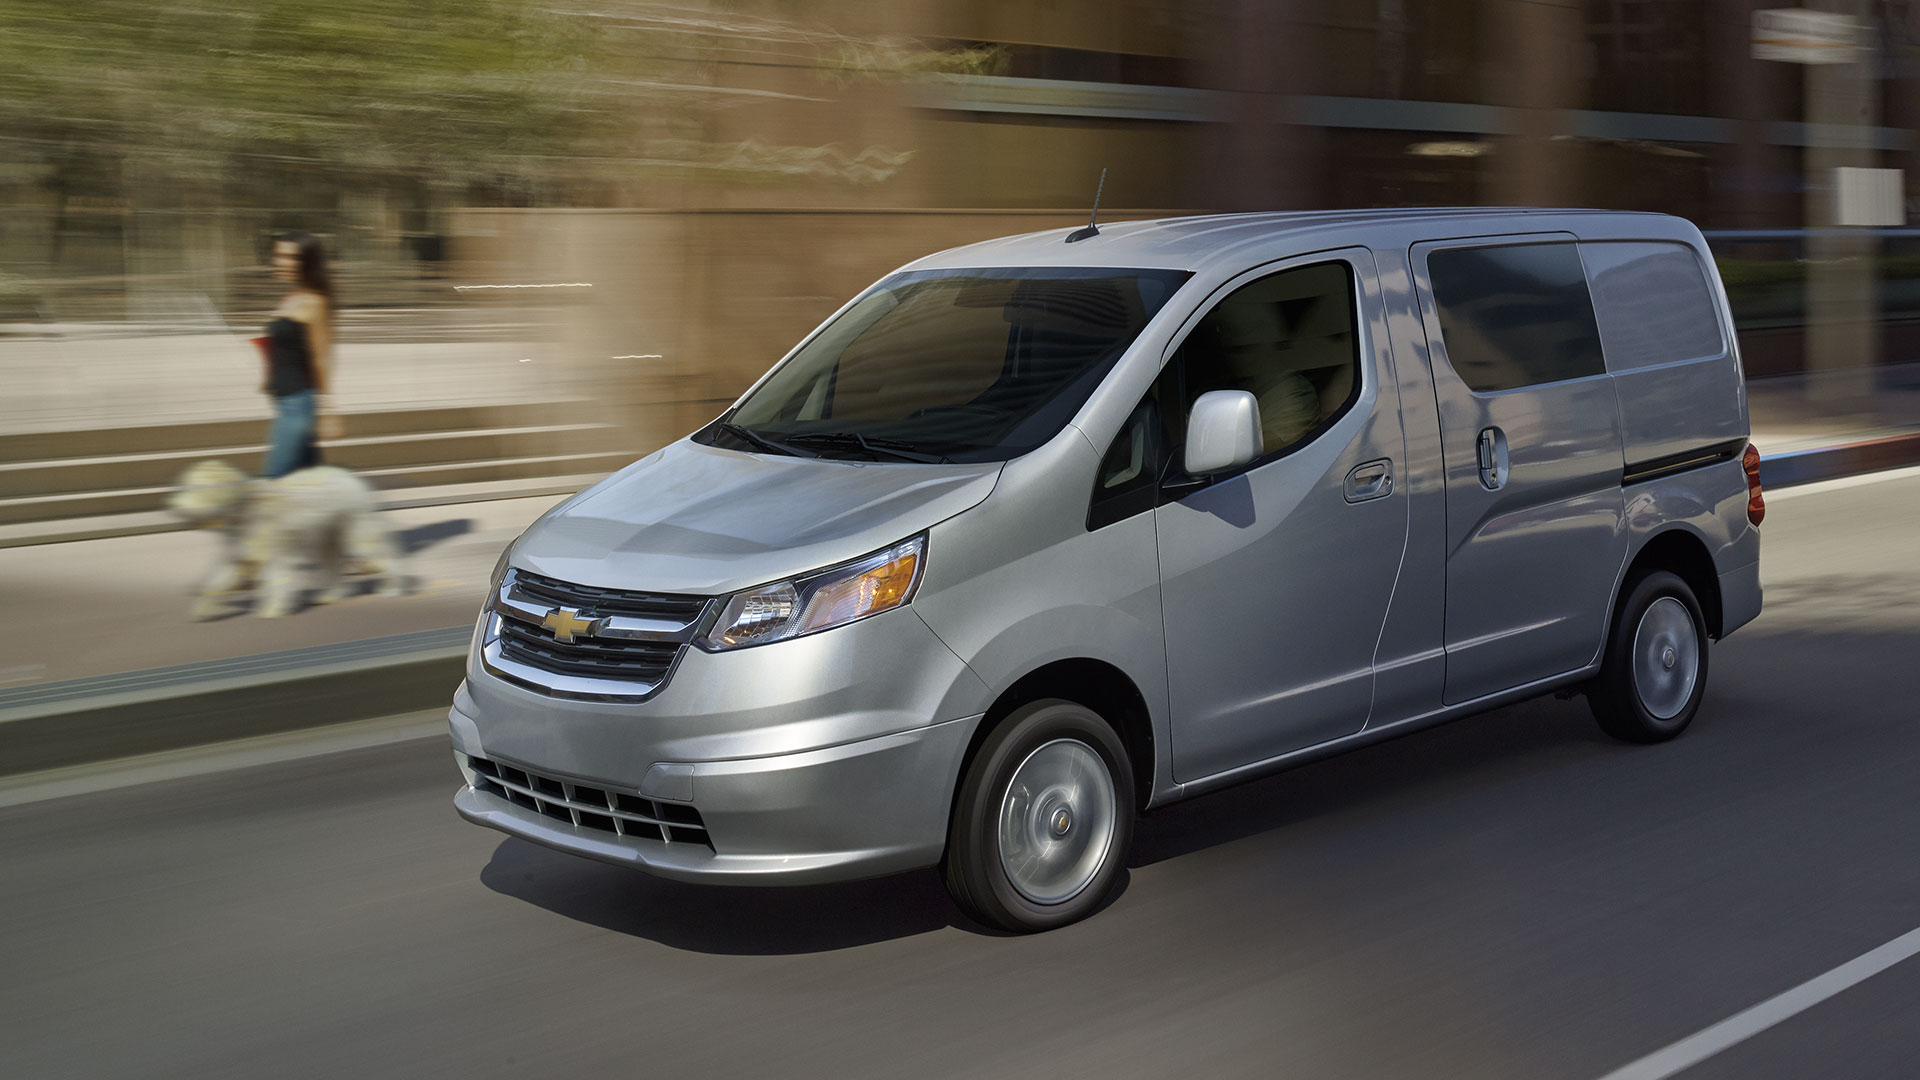 The City Express - Small Cargo Van for Businesses from Chevrolet